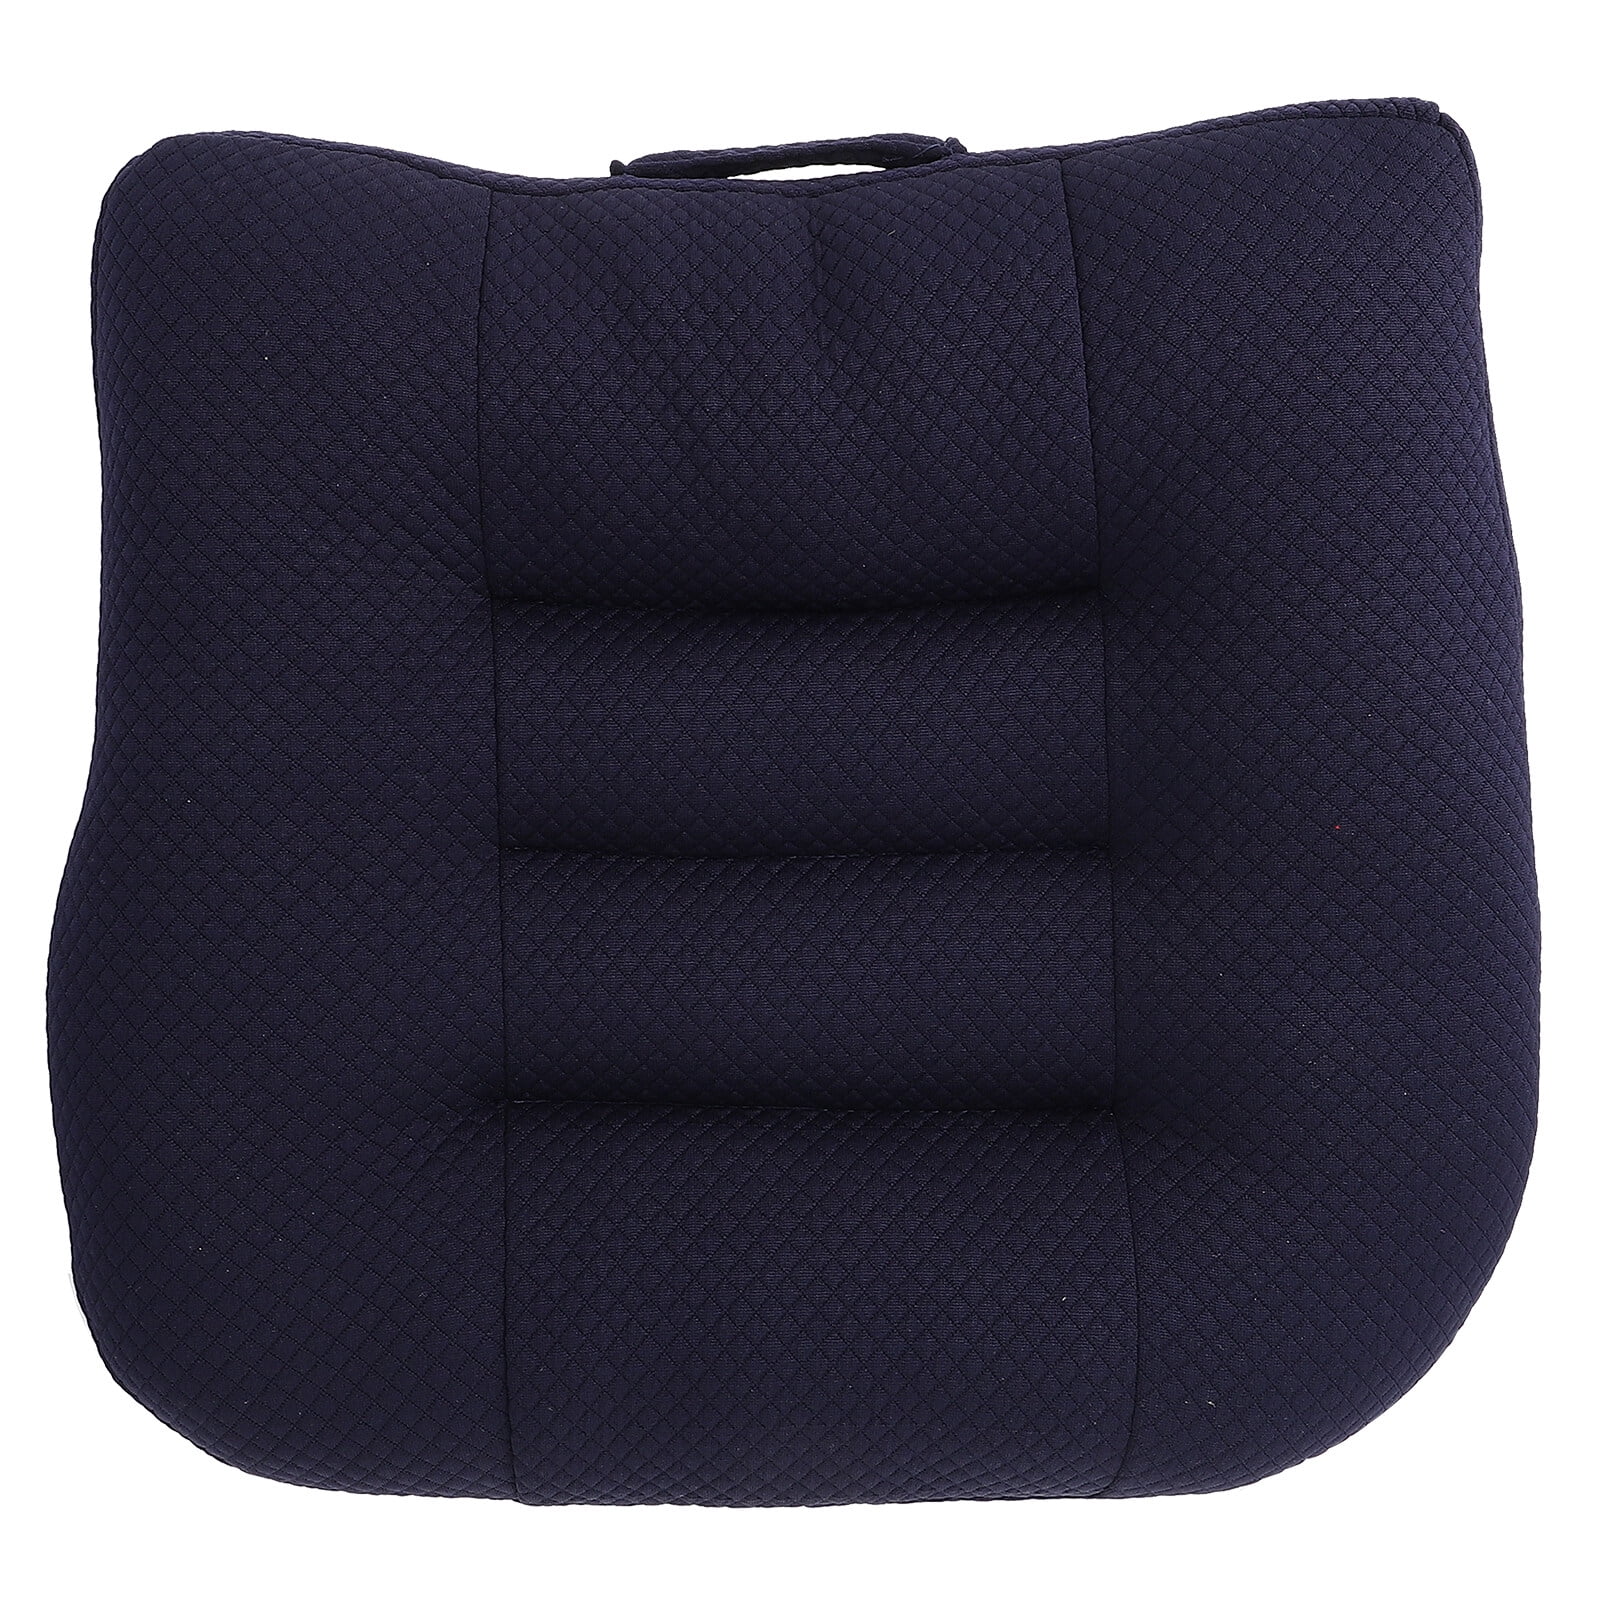 ZAVM Adult Booster Seat for Car, Car Booster Seat for Short Drivers, Butt  Cushion for Office Chairs, Driver Seat Cushion, Car Seat Cushions for  Driving, 17*17,4 27.95 - Quarter Price